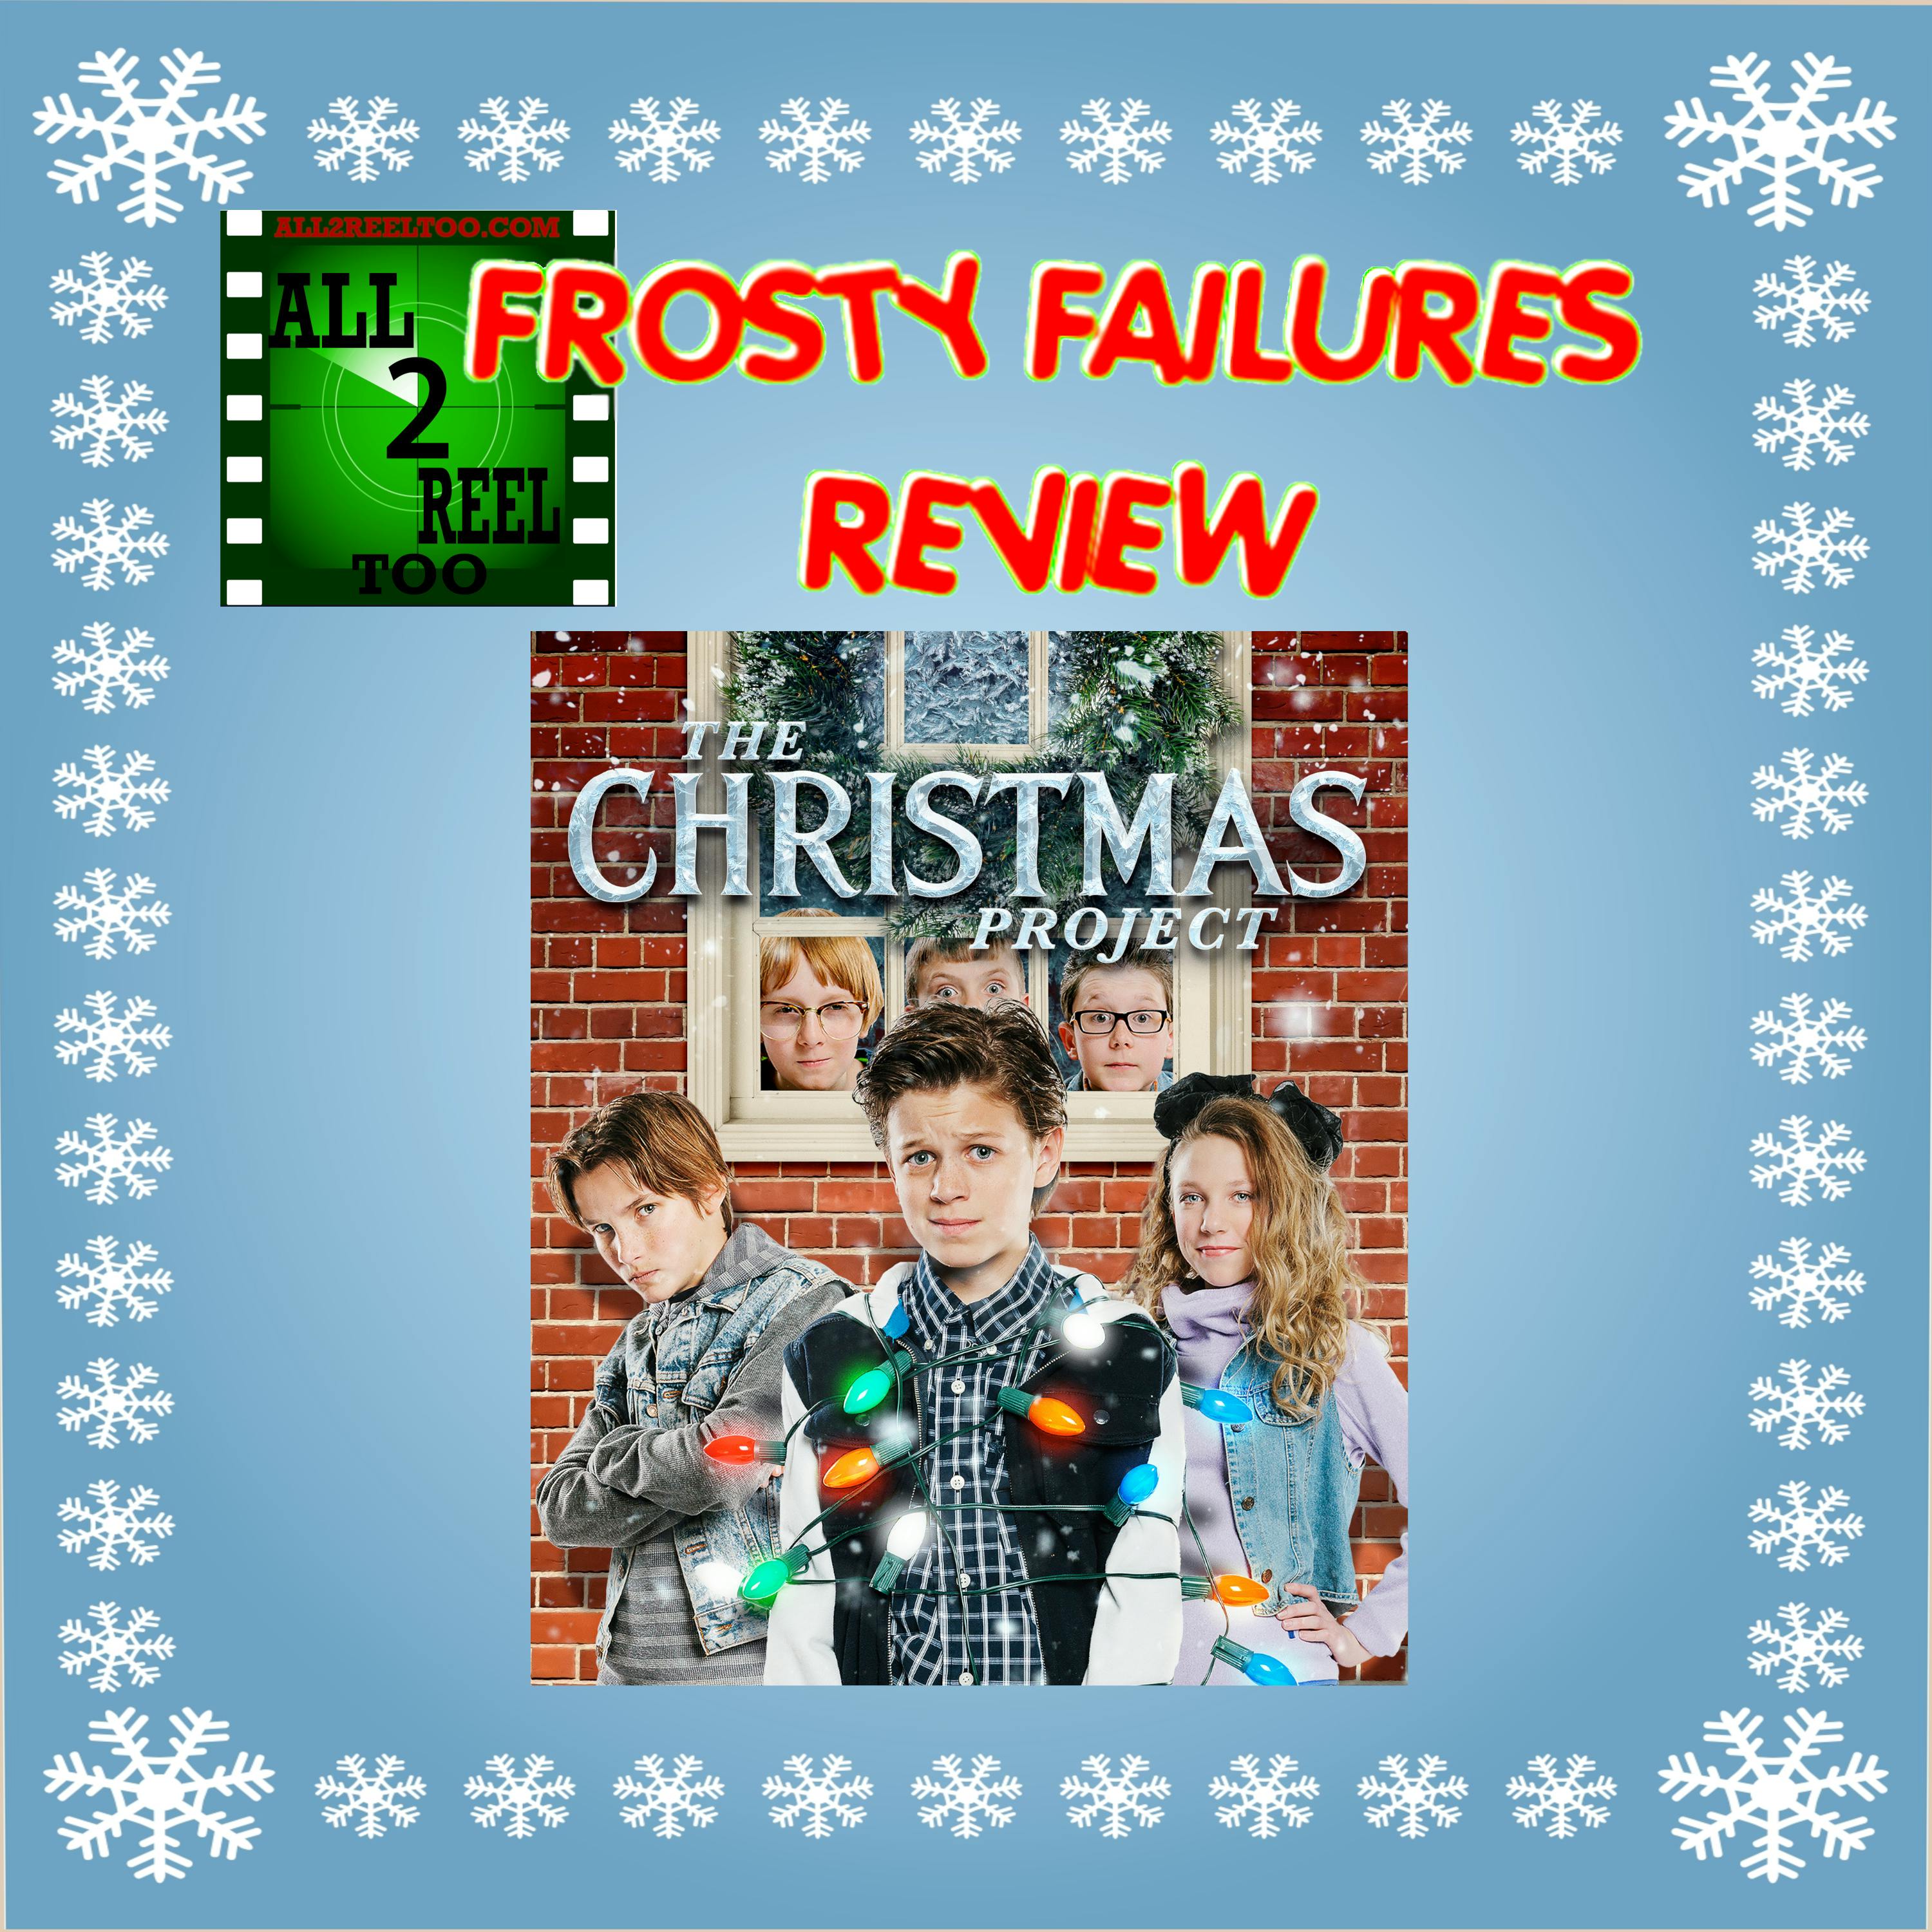 The Christmas Project  (2016)  - FROSTY FAILURES REVIEW